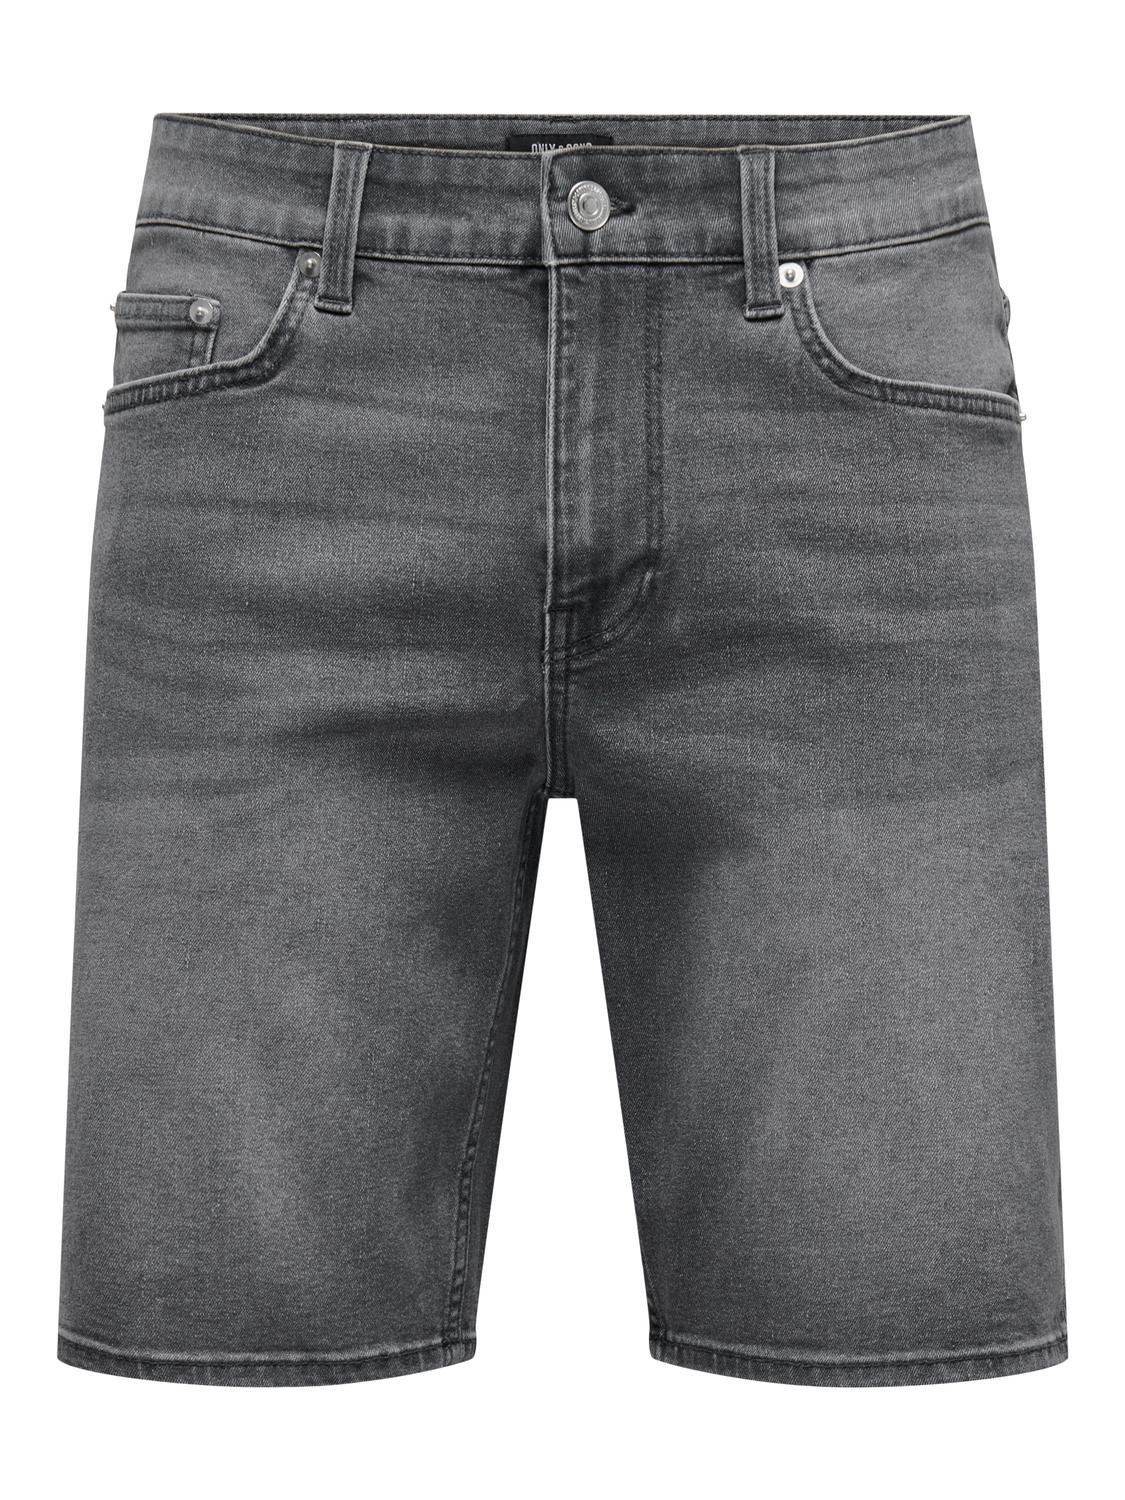 ONLY & SONS Shorts »ONSPLY DBD 9277 PIM DNM SHORTS« von Only & Sons